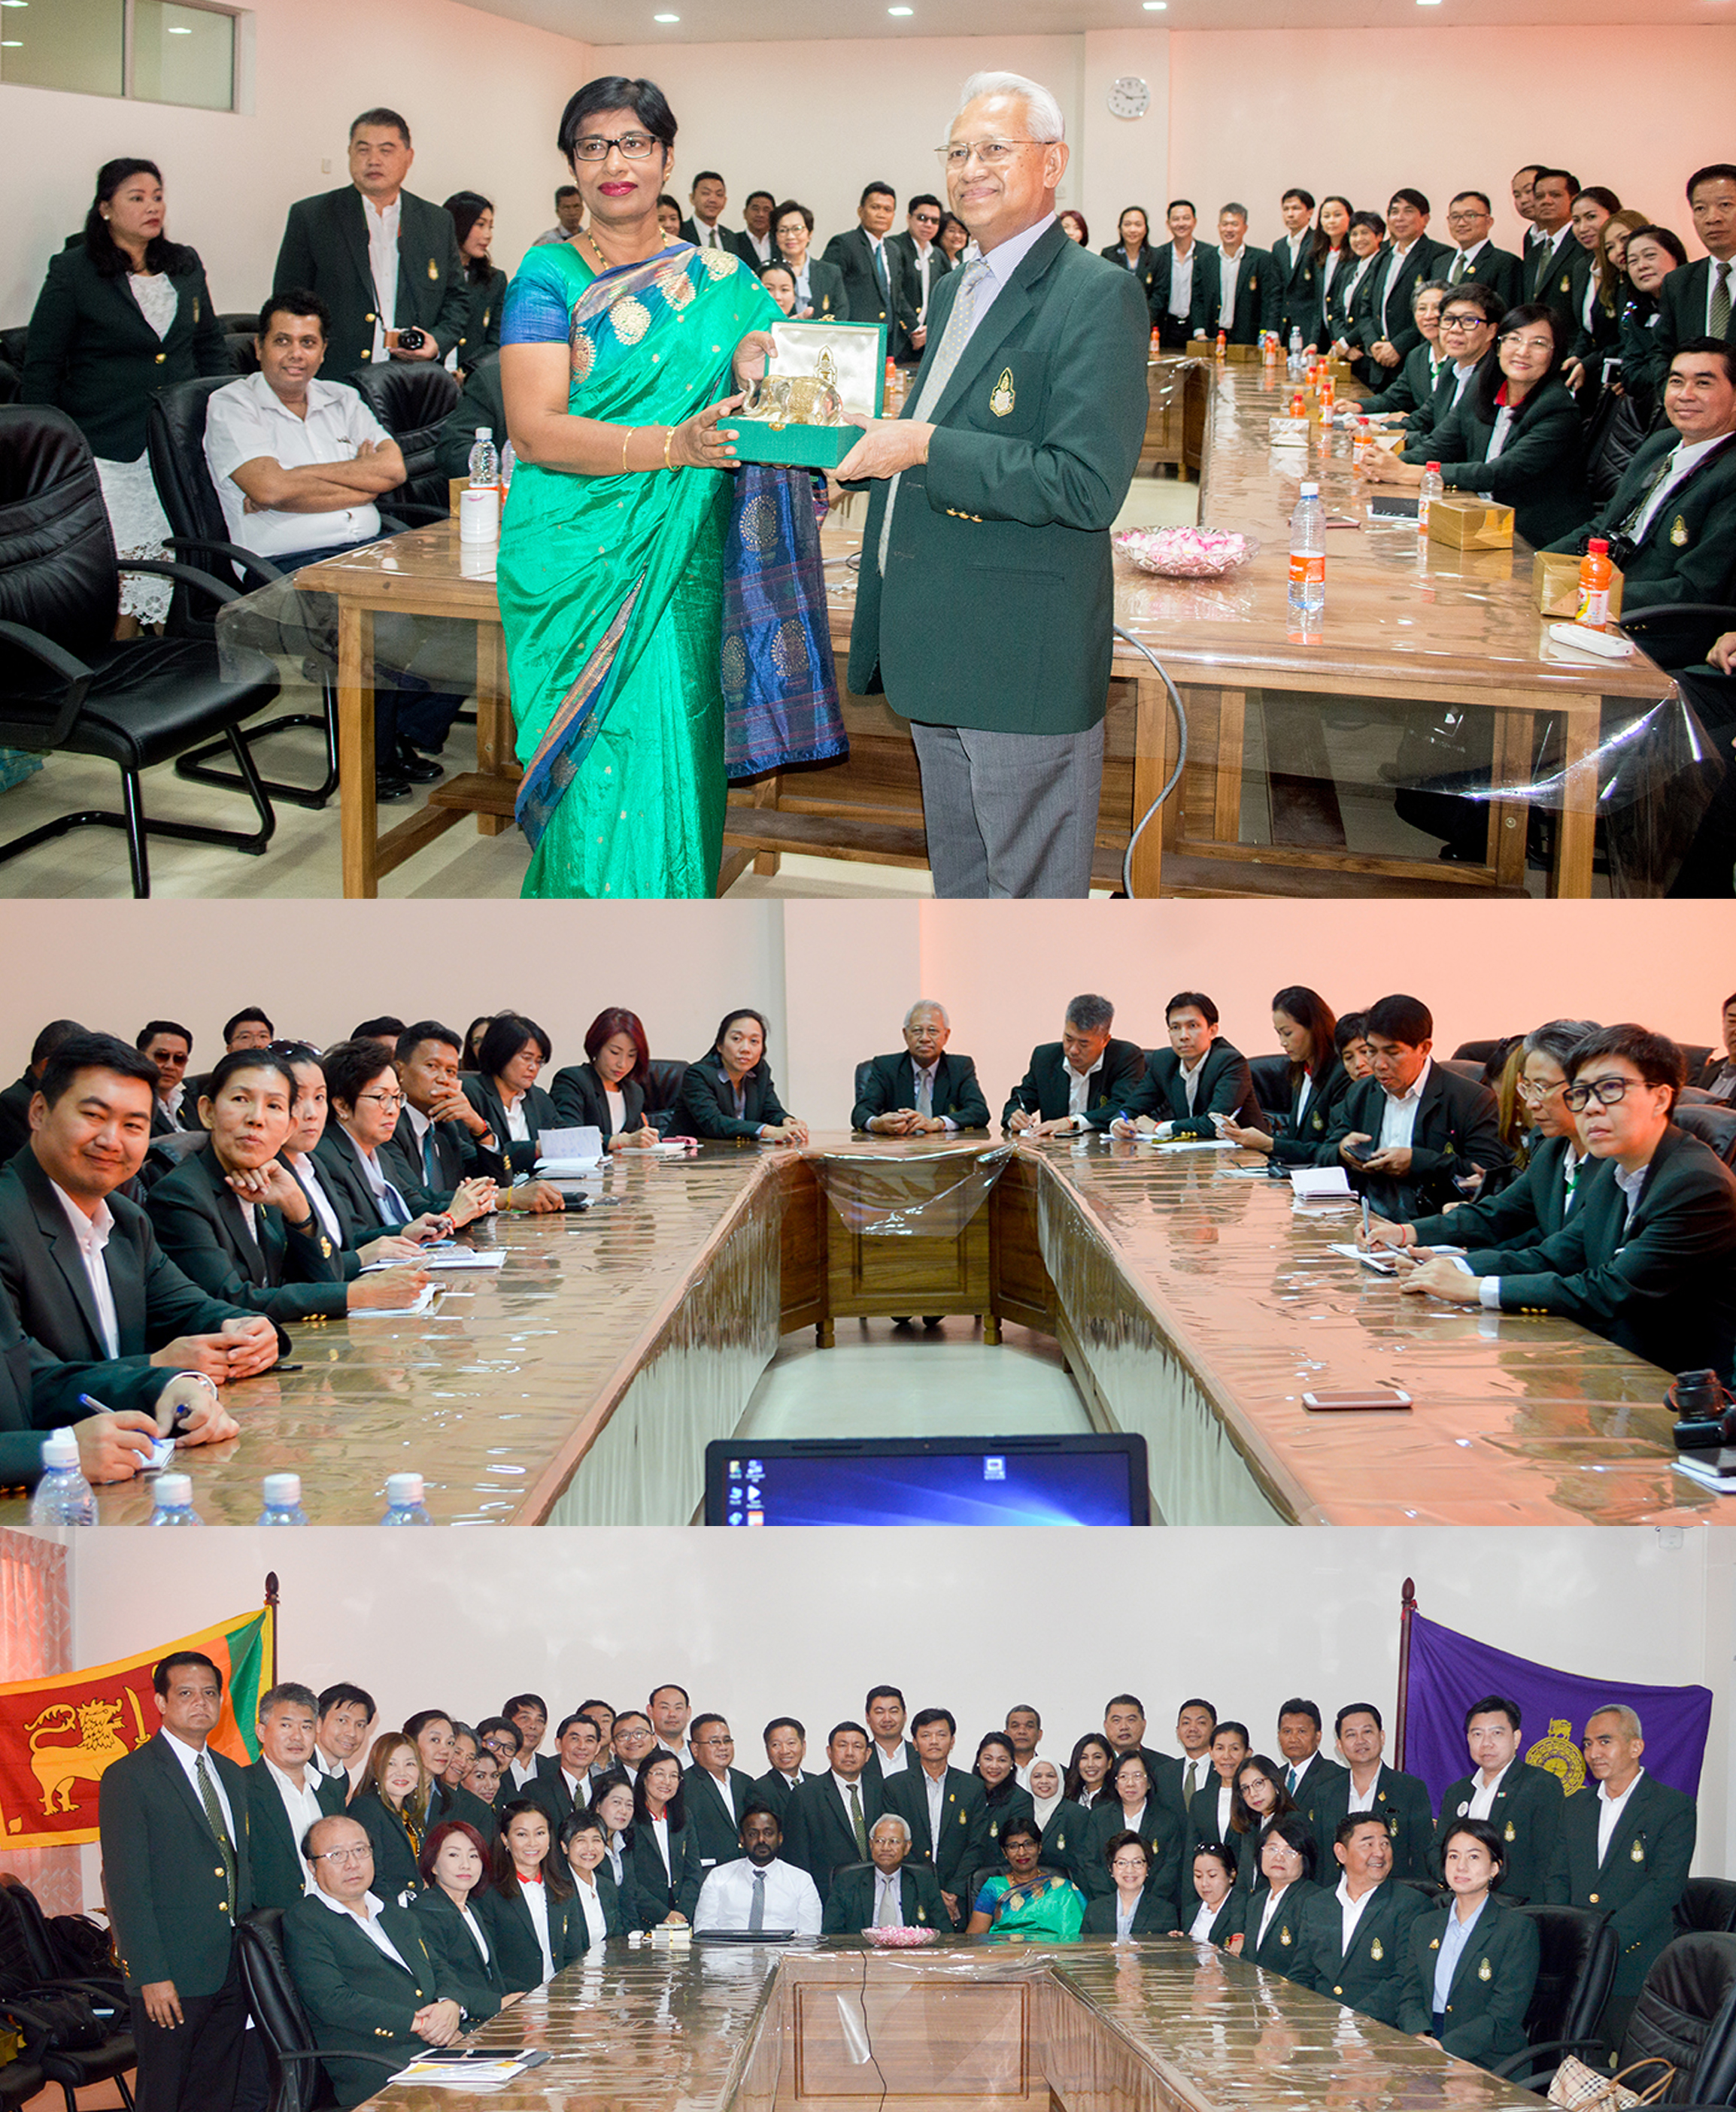 The students of King Prajadhipok’s Institute on Development on Democracy and Governance visited the FGS